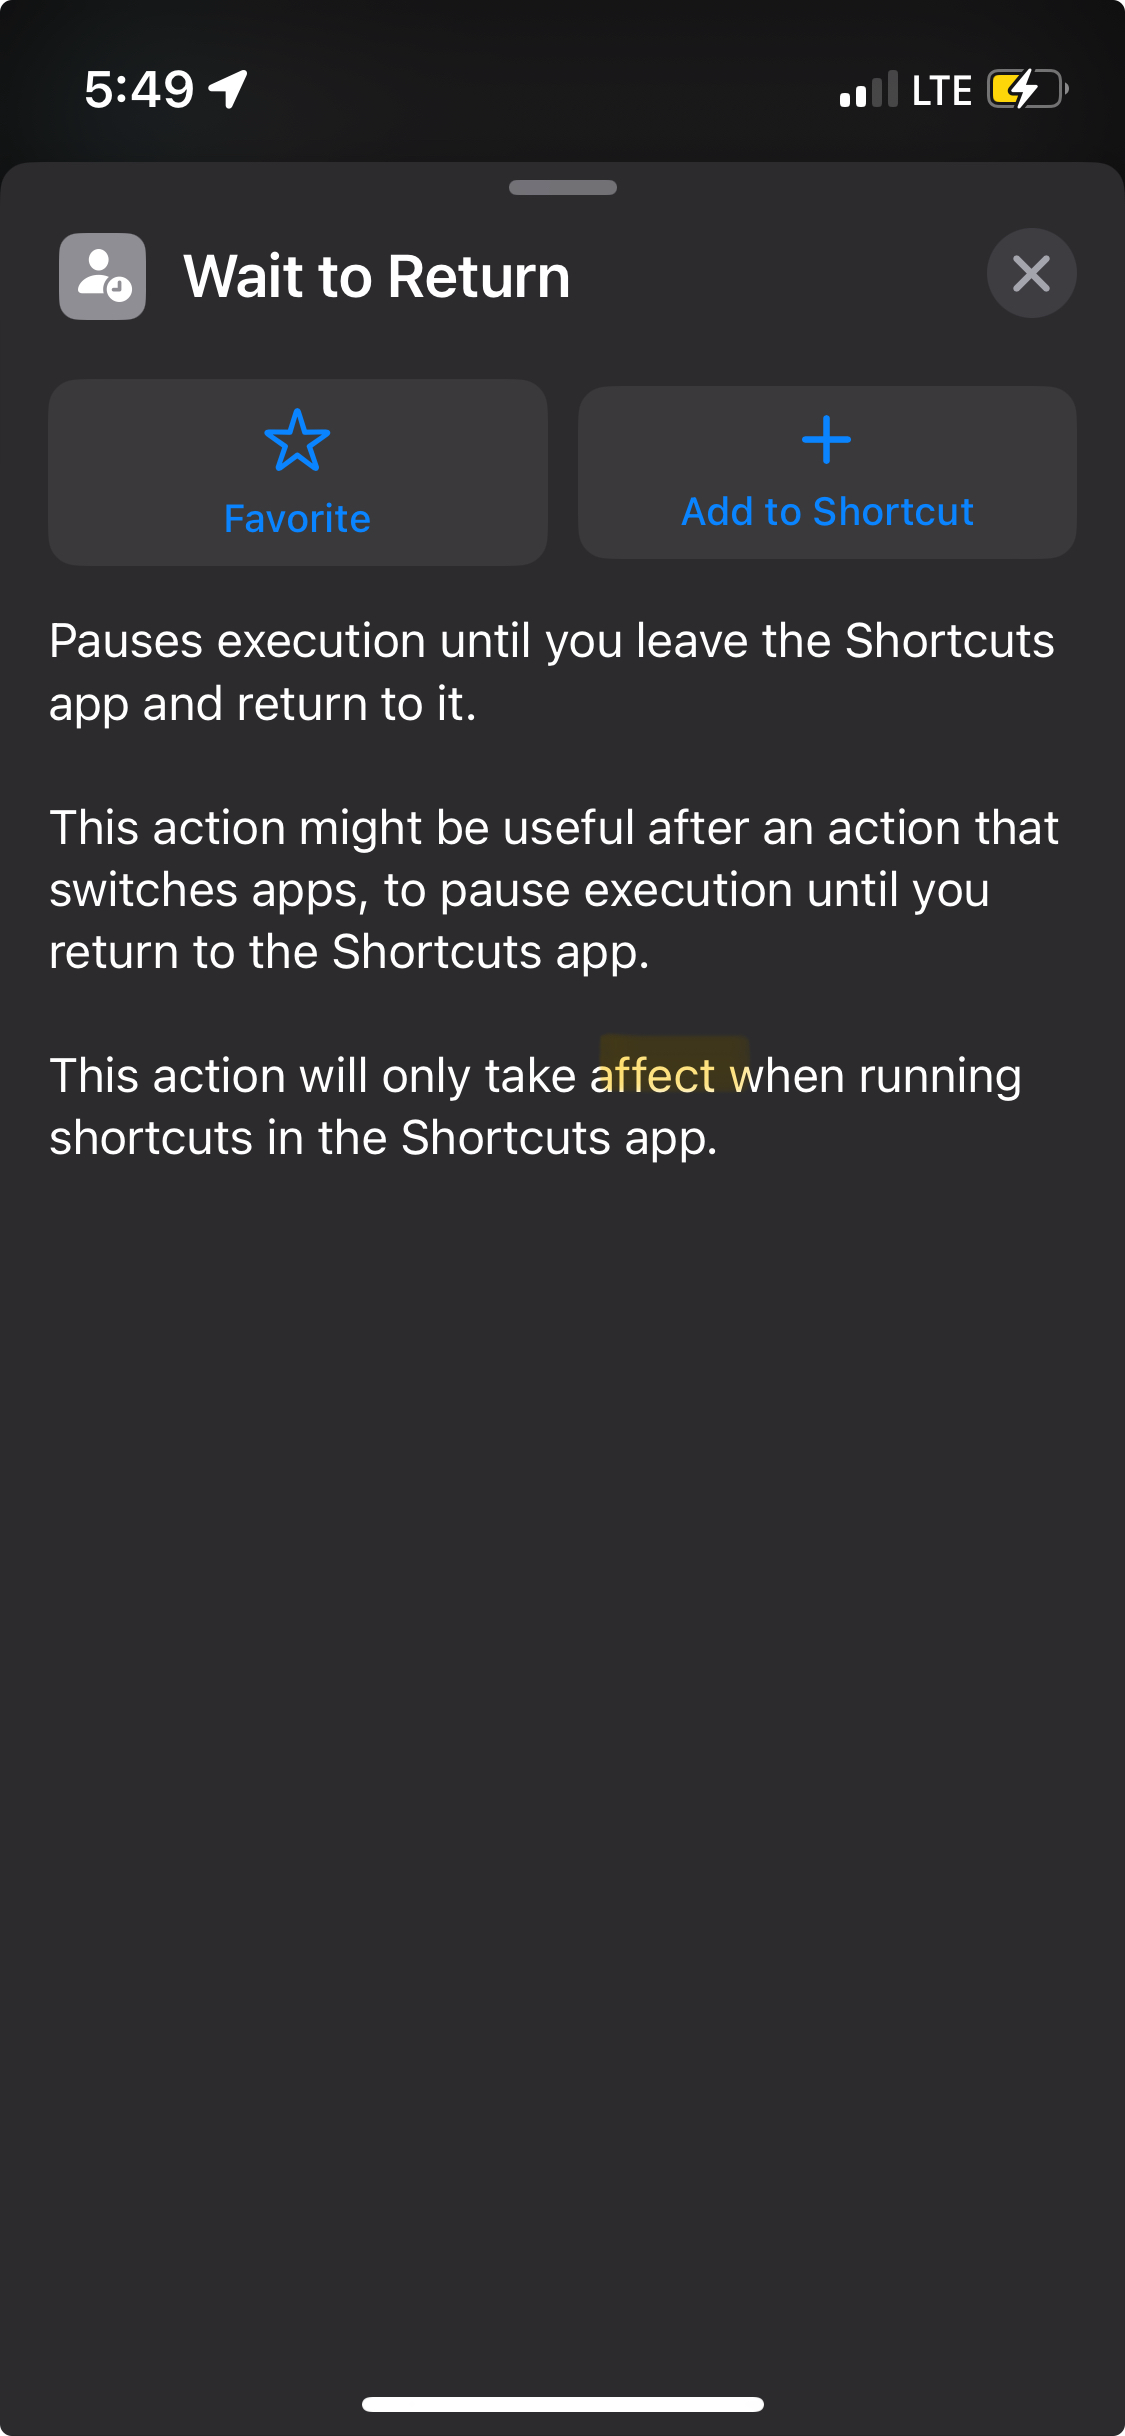 Screenshot of a smartphone displaying a &lsquo;Wait to Return&rsquo; function within the Shortcuts app, explaining that it pauses execution until the user leaves and returns to the app. The screen includes a highlighted typo that reads “take affect” instead of “take effect”.